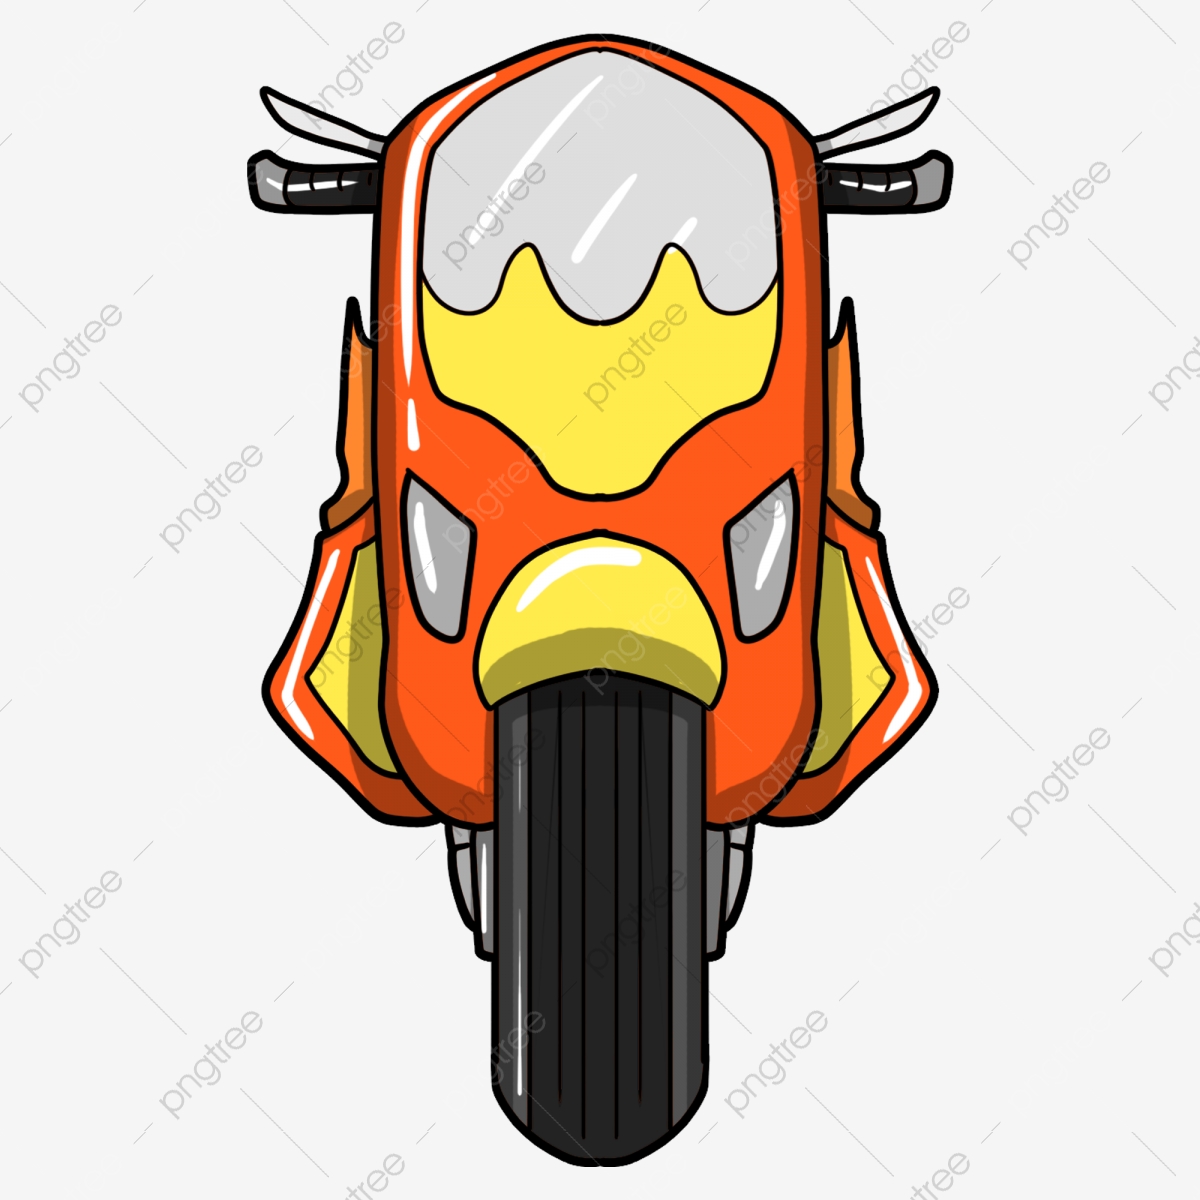 oranges clipart motorcycle